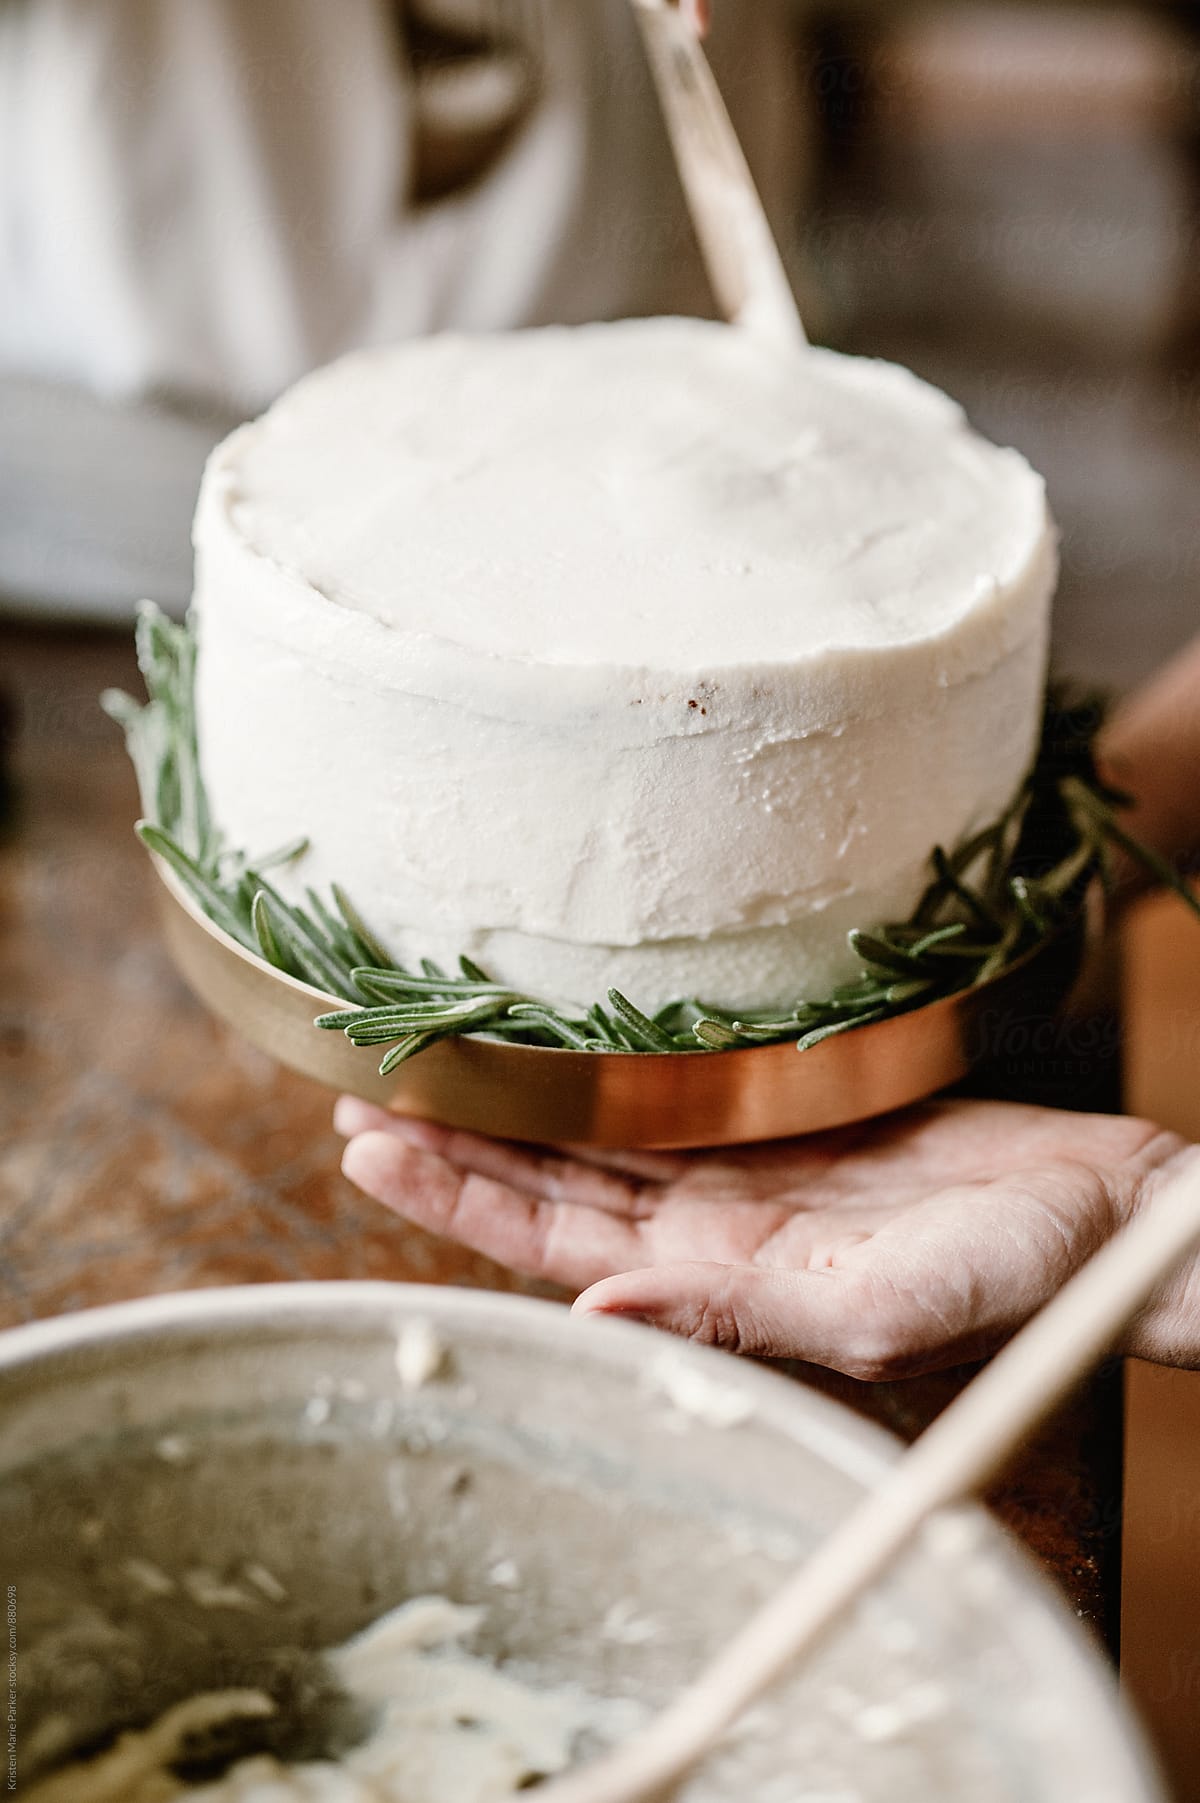 Females decorate homemade cake with white icing and rosemary